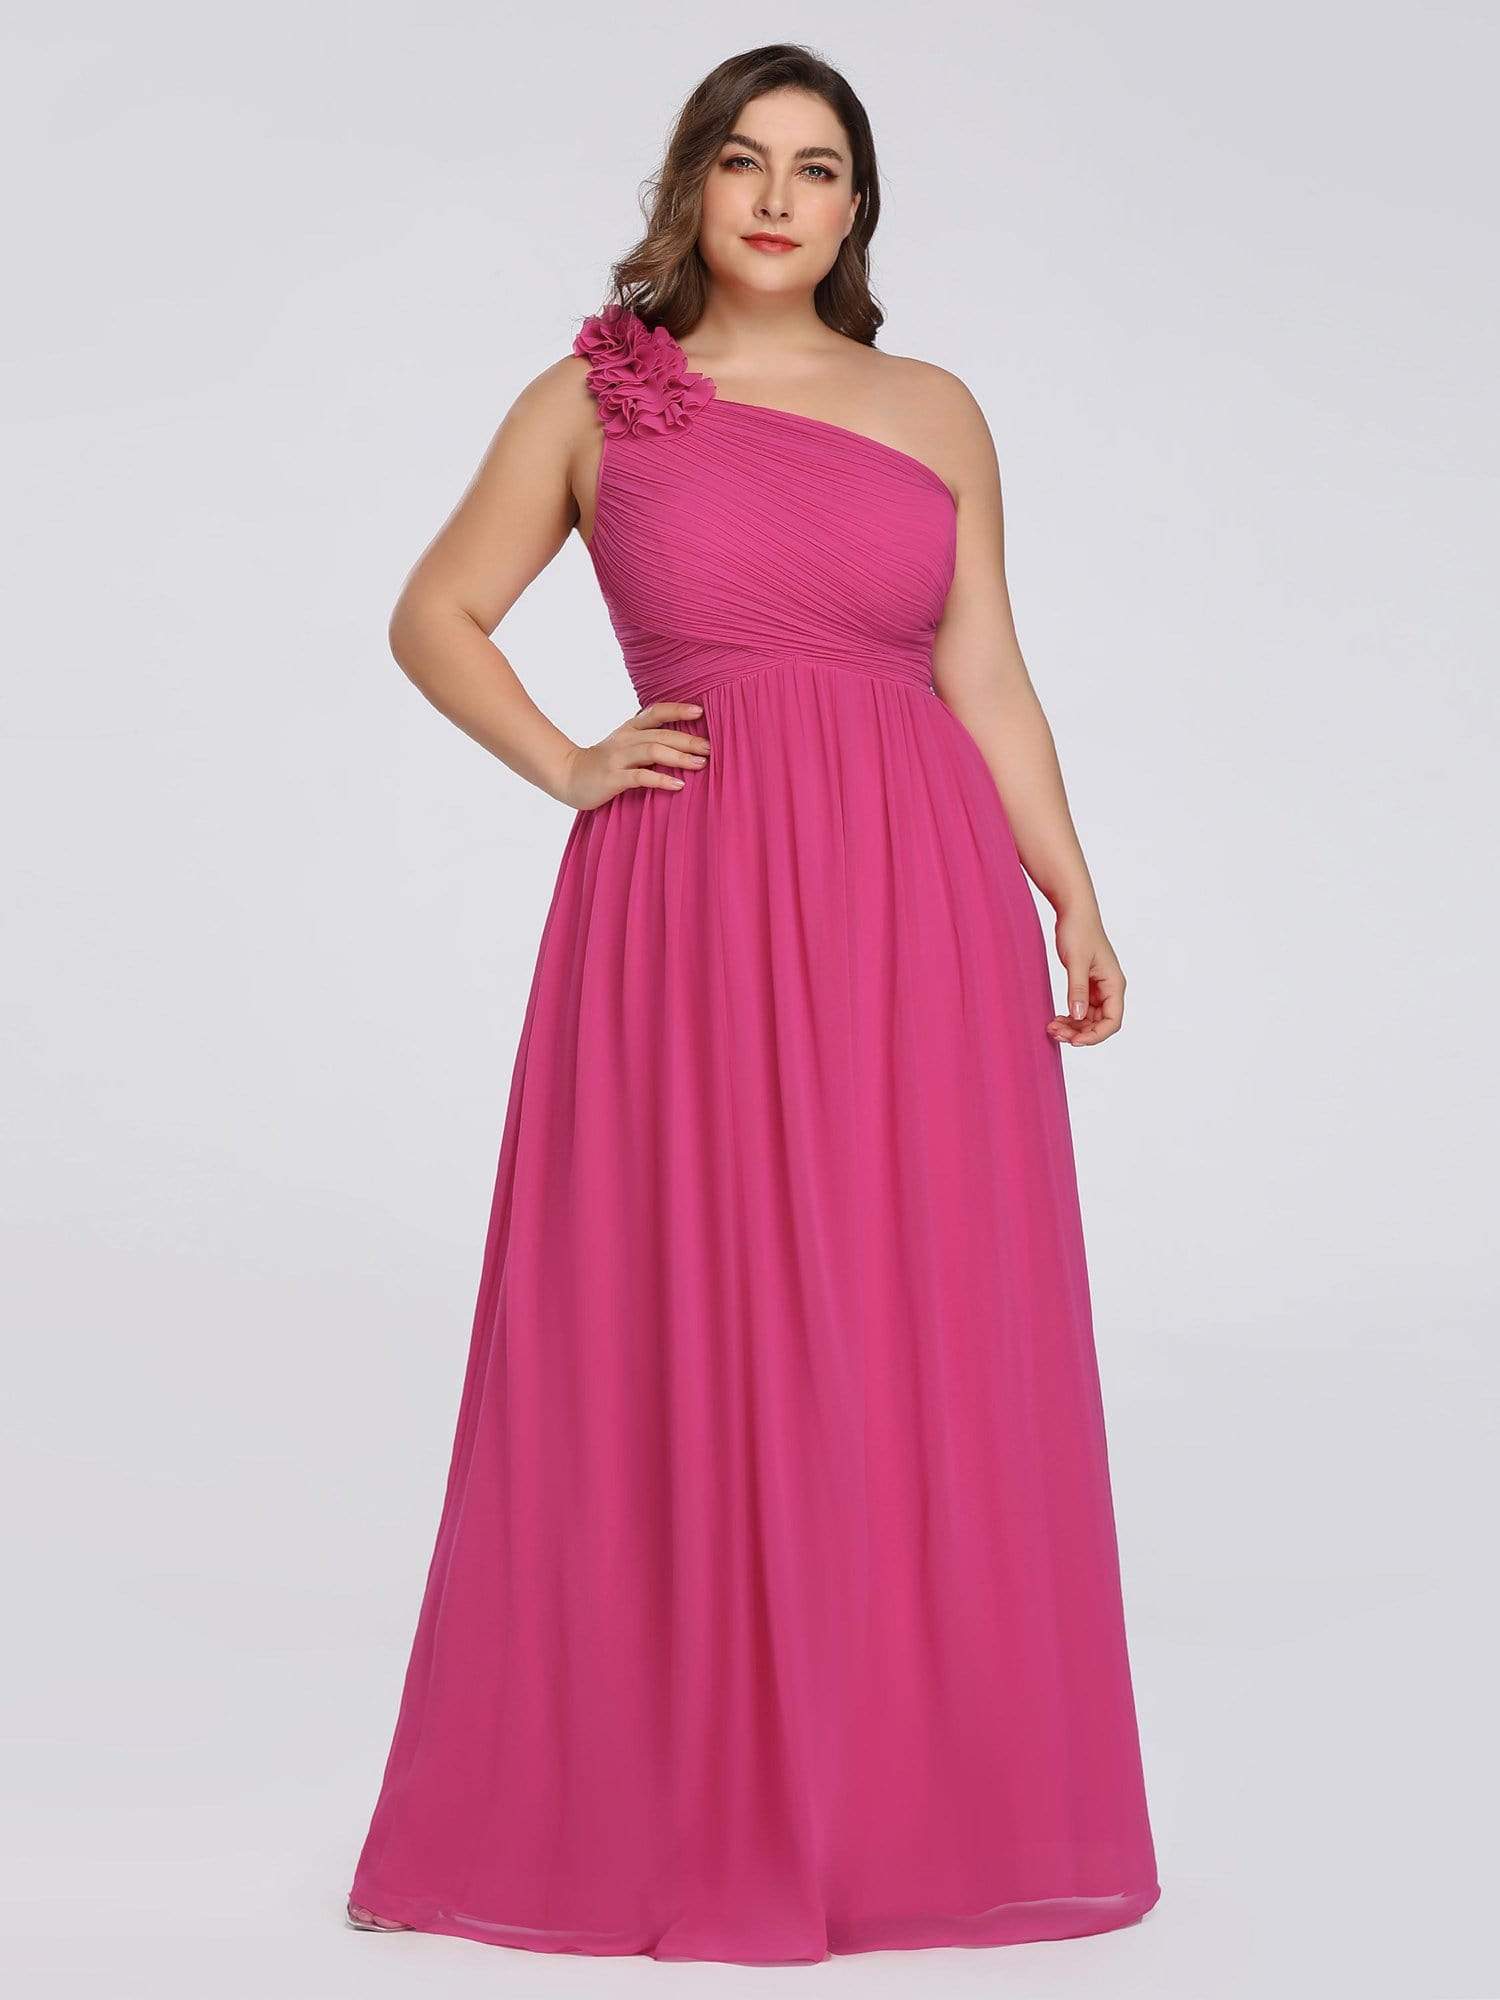 pink dresses for plus size women